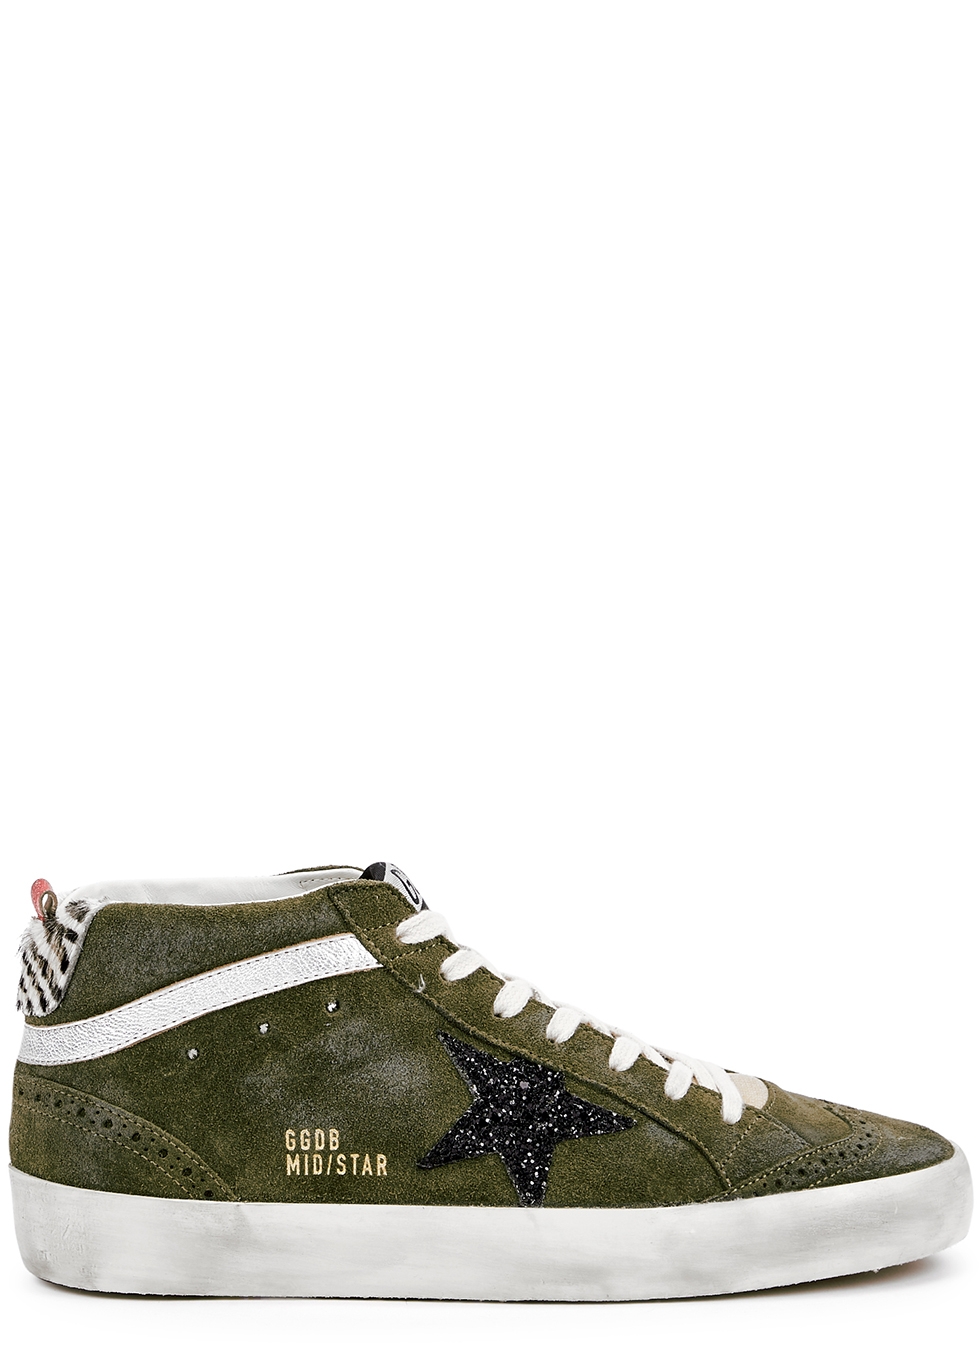 Mid Star distressed suede sneakers